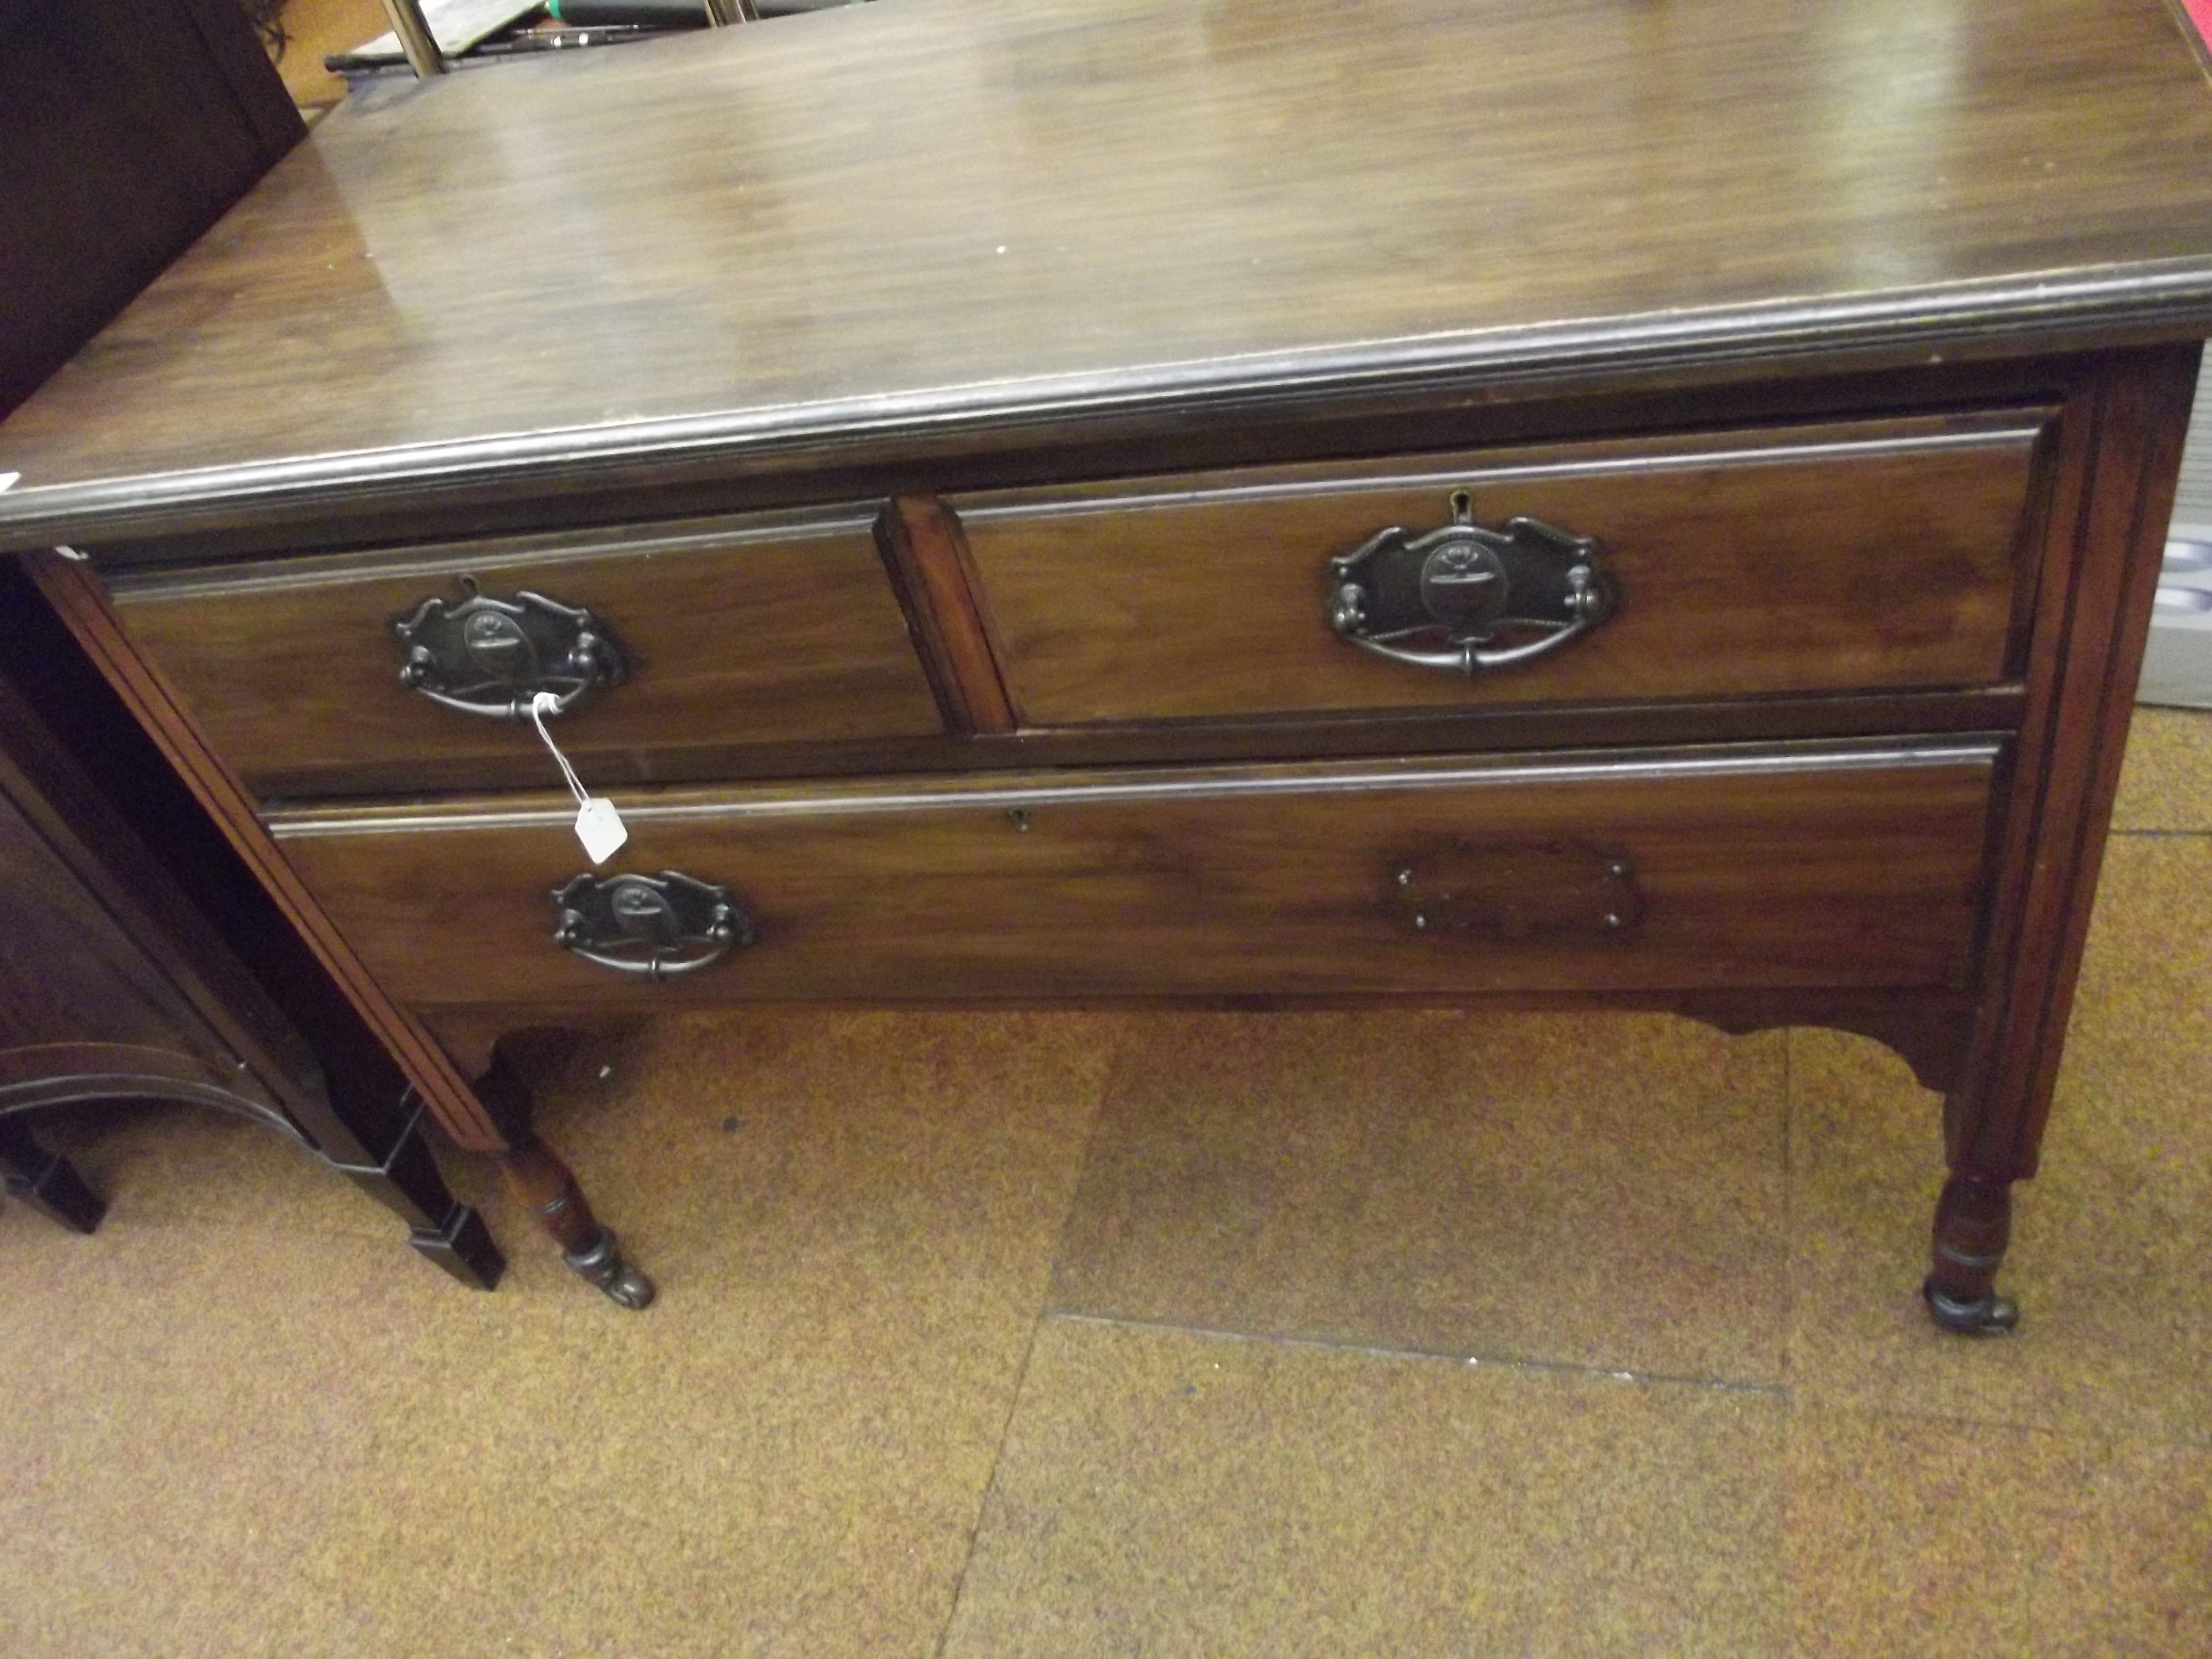 Two over one Victorian chest of drawers on casters